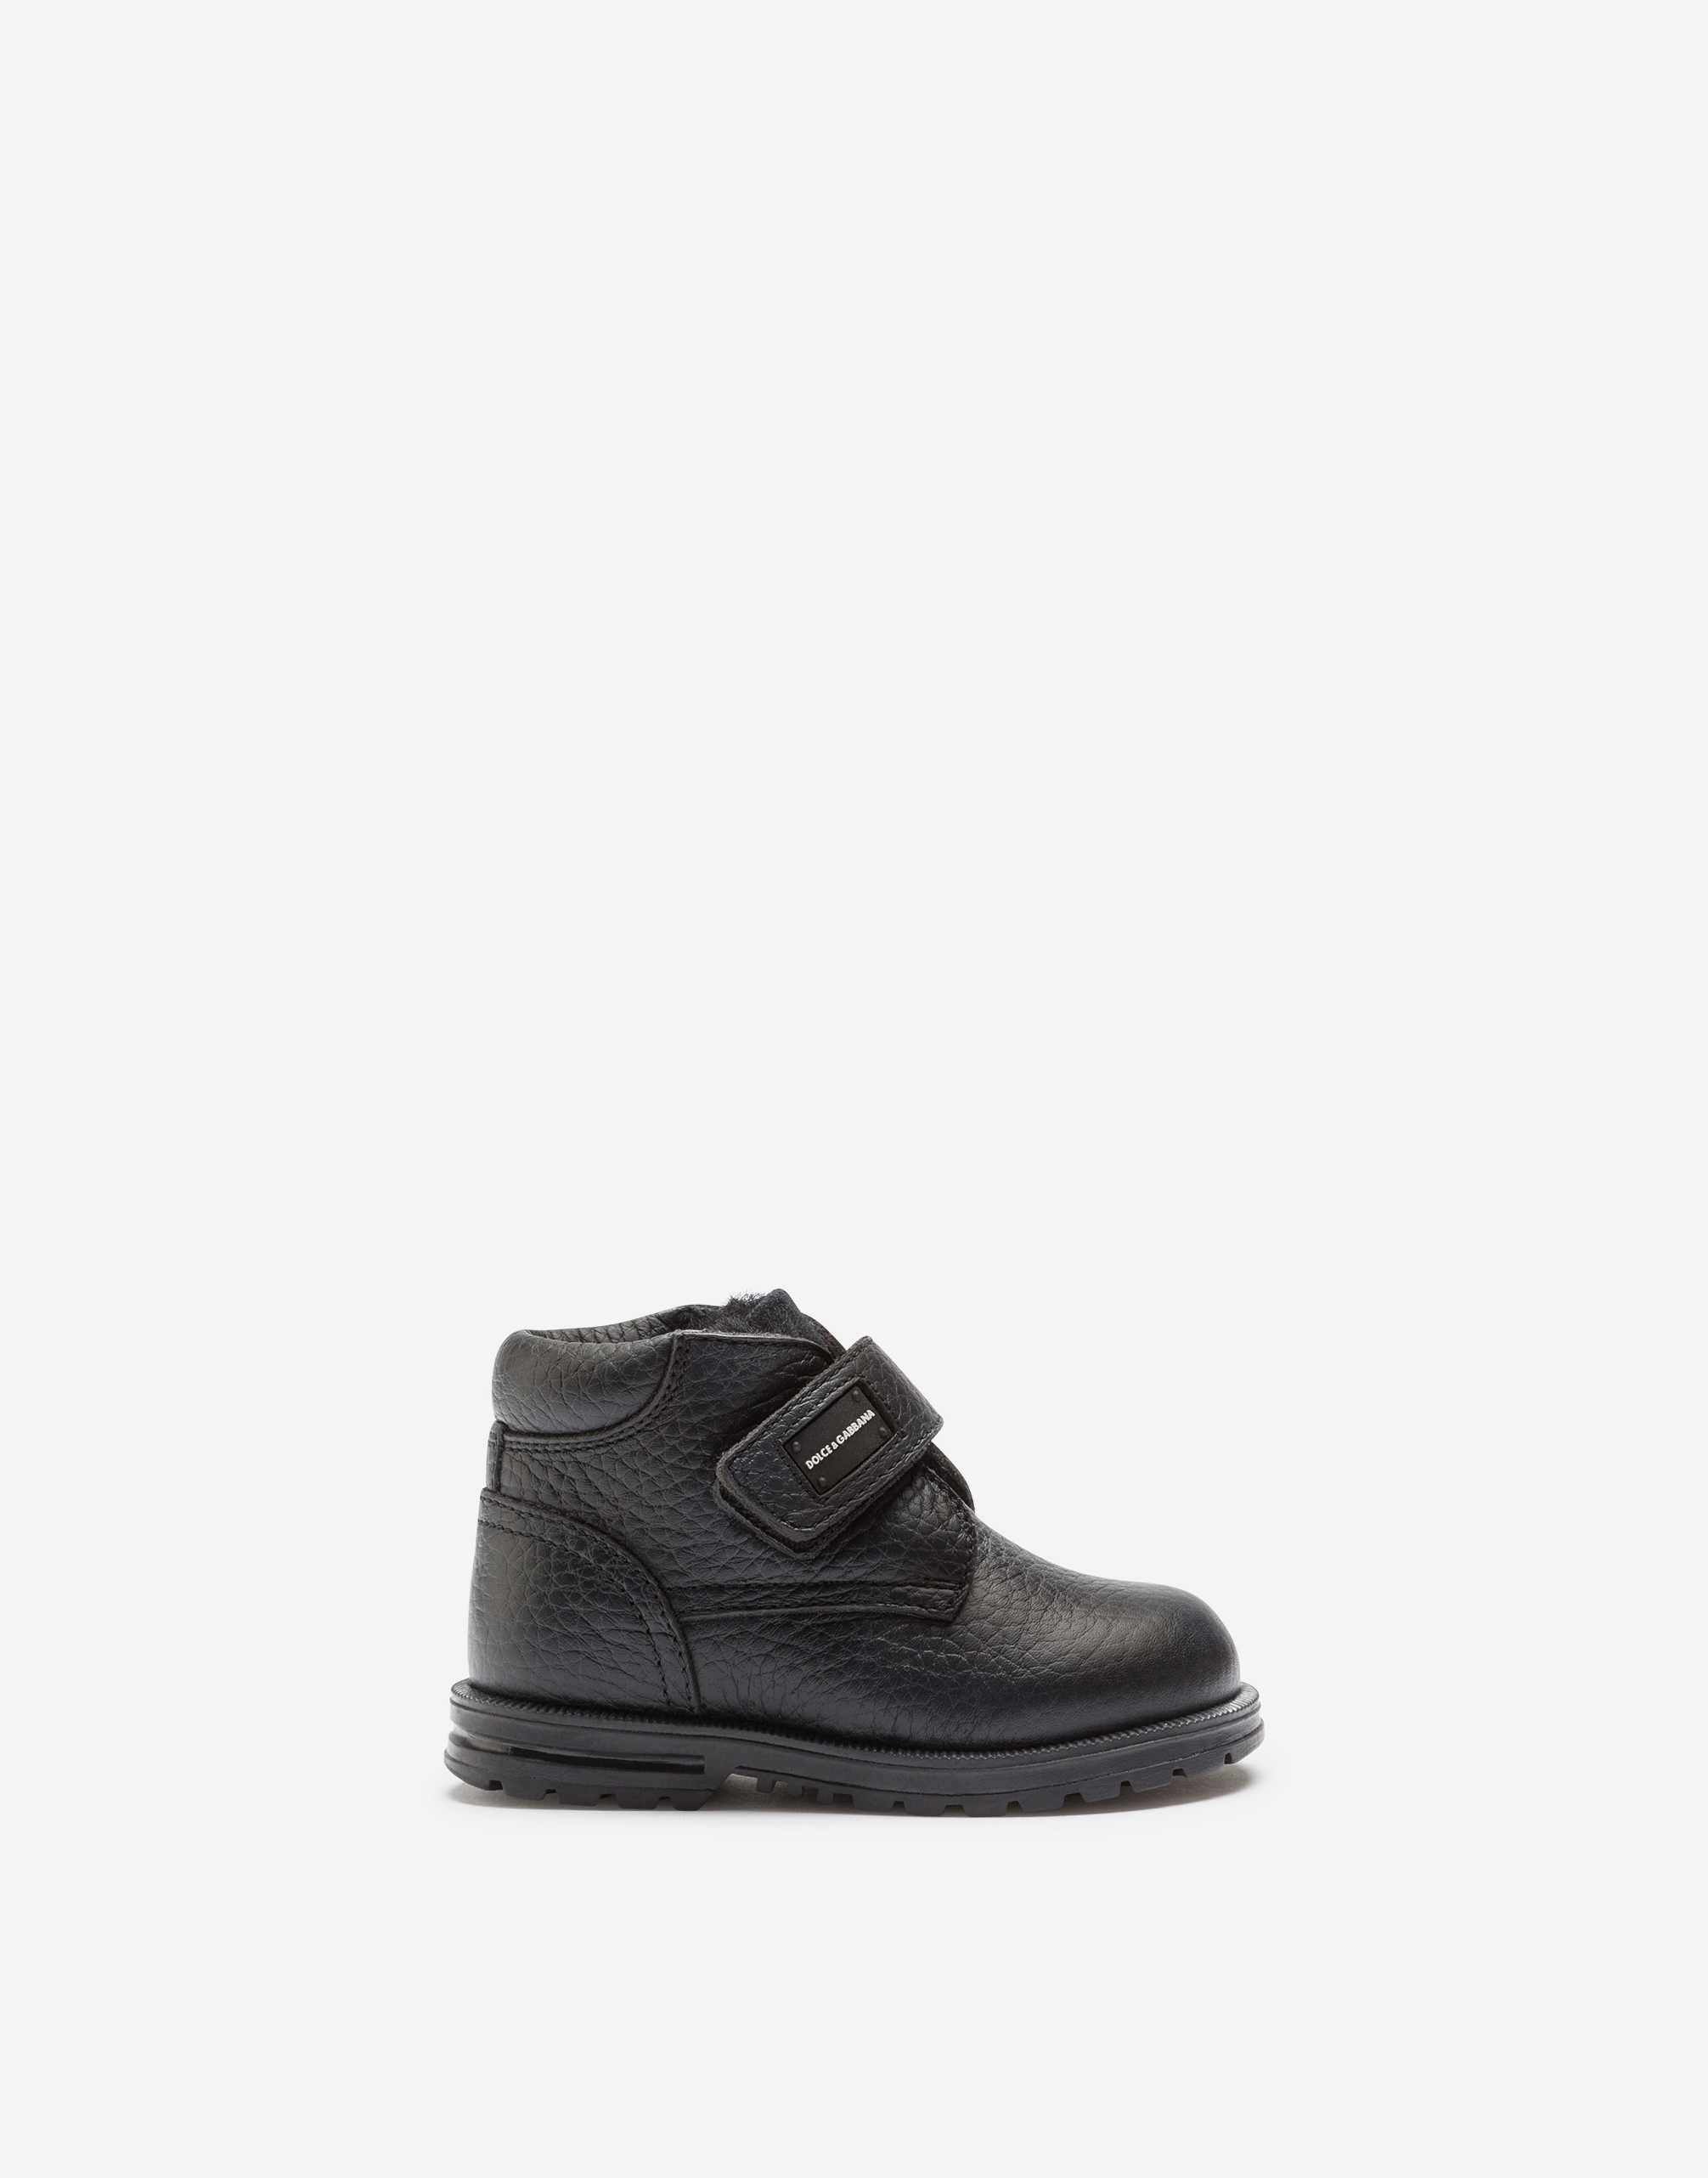 Dolce & Gabbana Babies'  Shoes For First Steps (19-26) - Calfskin And Shearling Ankle Boots In Black